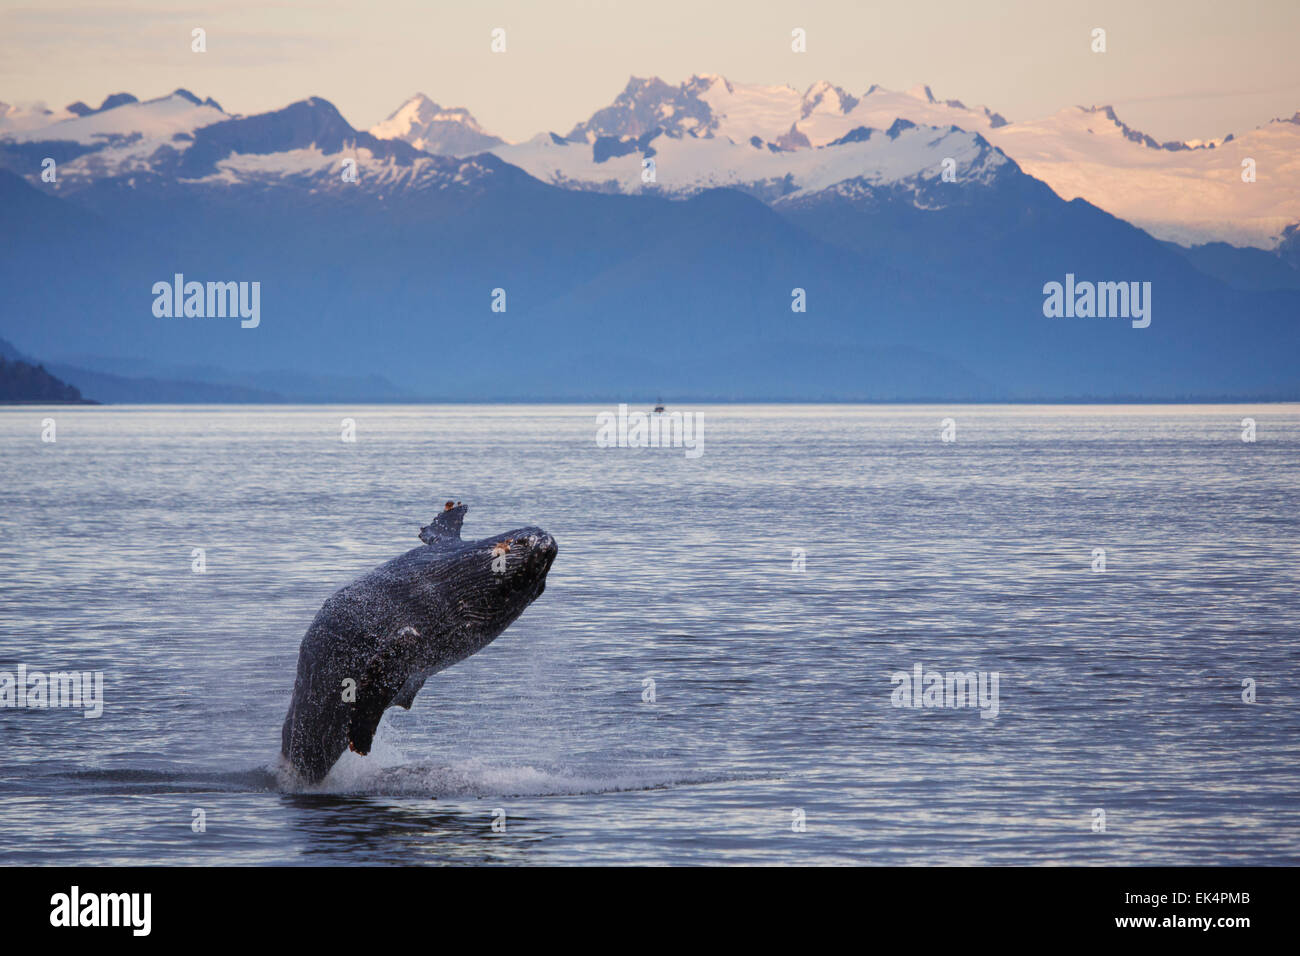 Humpback Whale, Tongass National Forest, Alaska Foto Stock